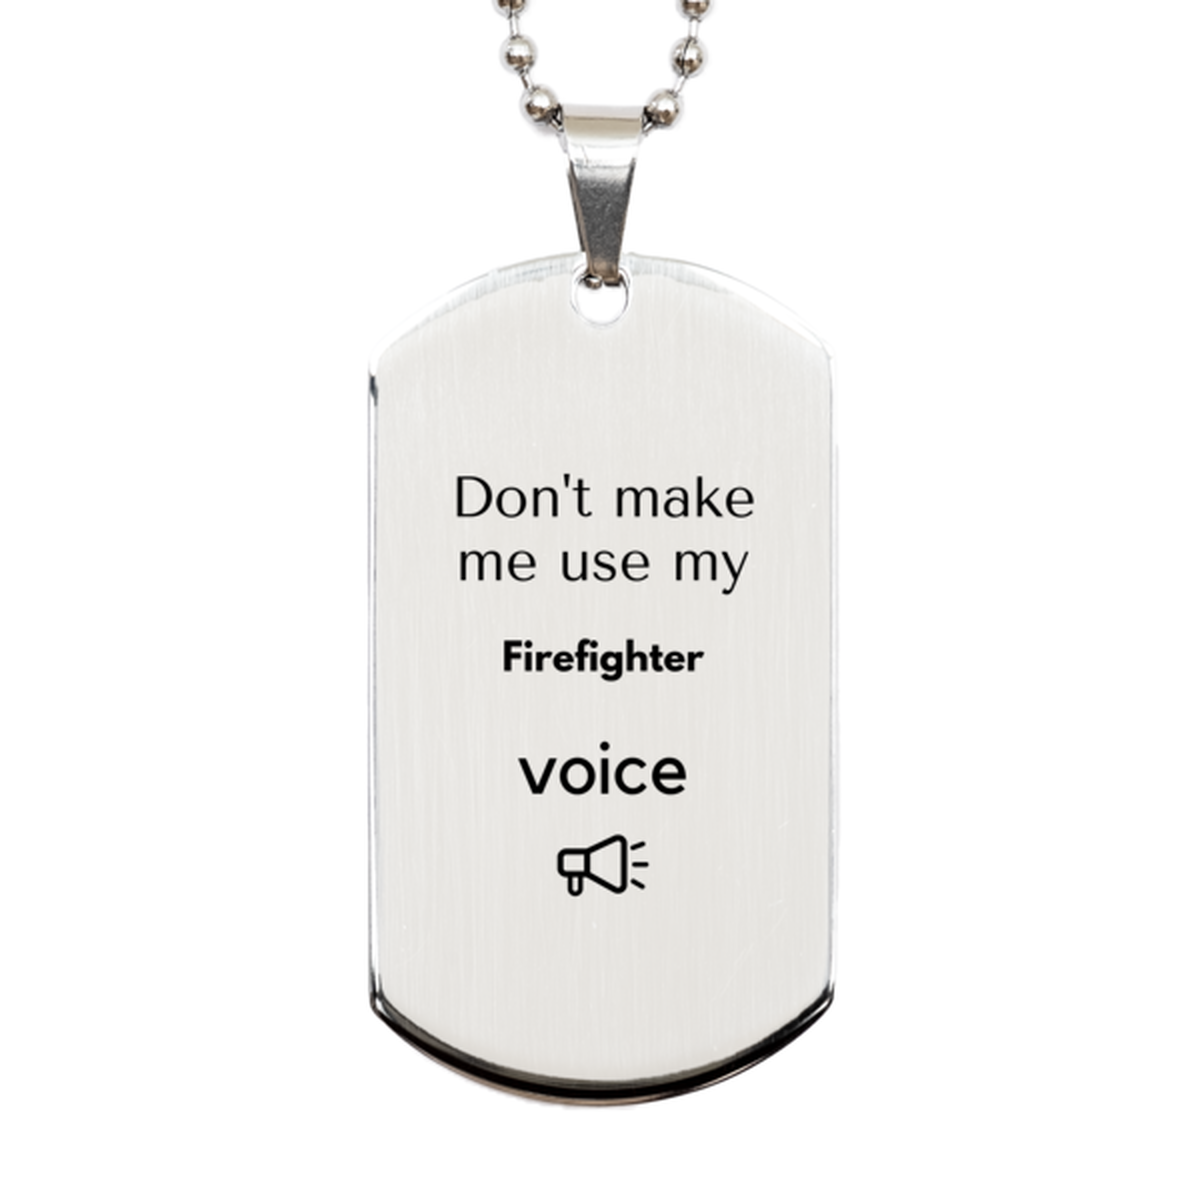 Don't make me use my Firefighter voice, Sarcasm Firefighter Gifts, Christmas Firefighter Silver Dog Tag Birthday Unique Gifts For Firefighter Coworkers, Men, Women, Colleague, Friends